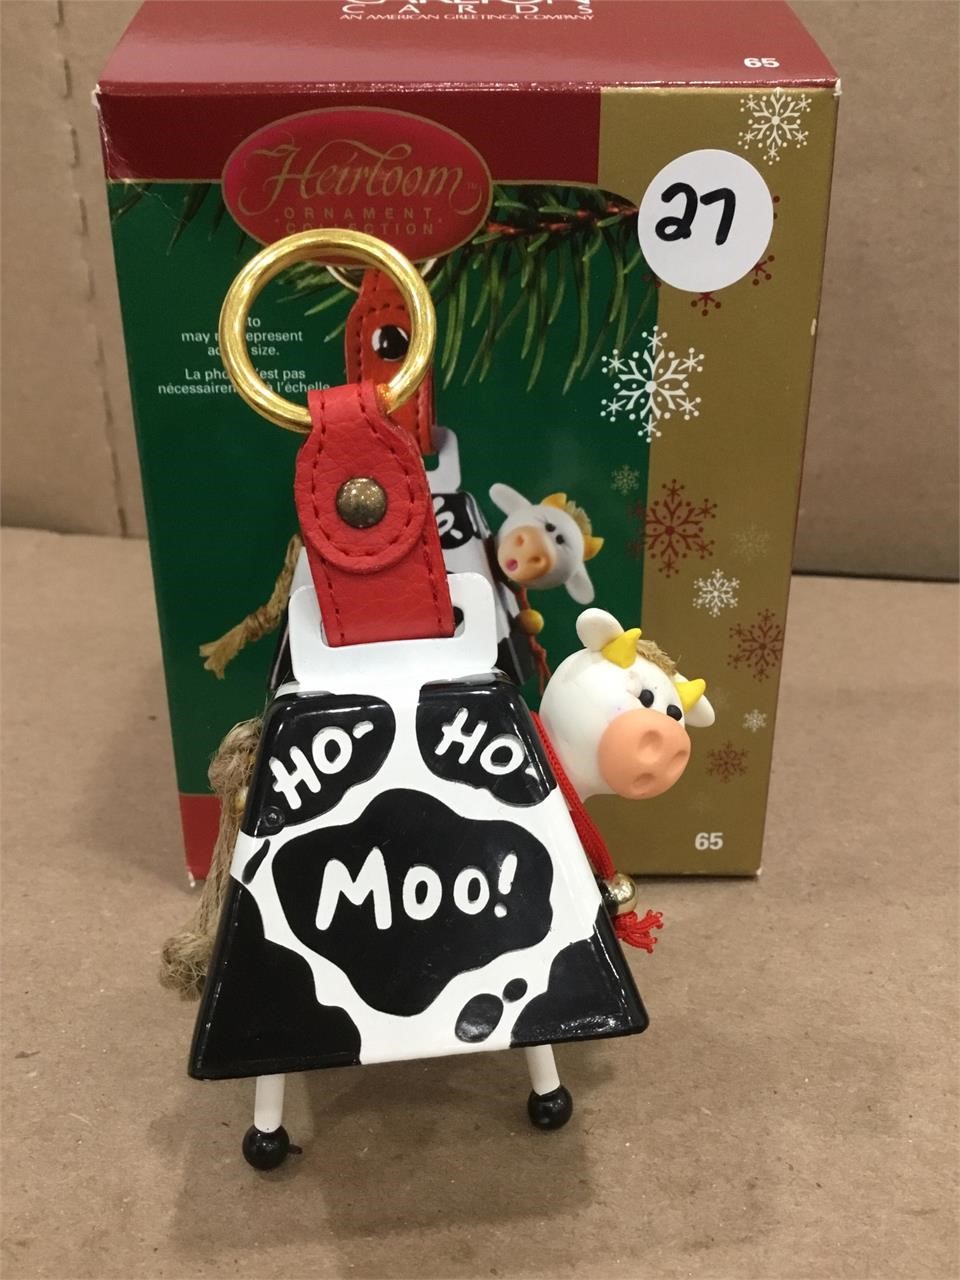 Vintage Heirloom Ornament Collection Cow "Belle"